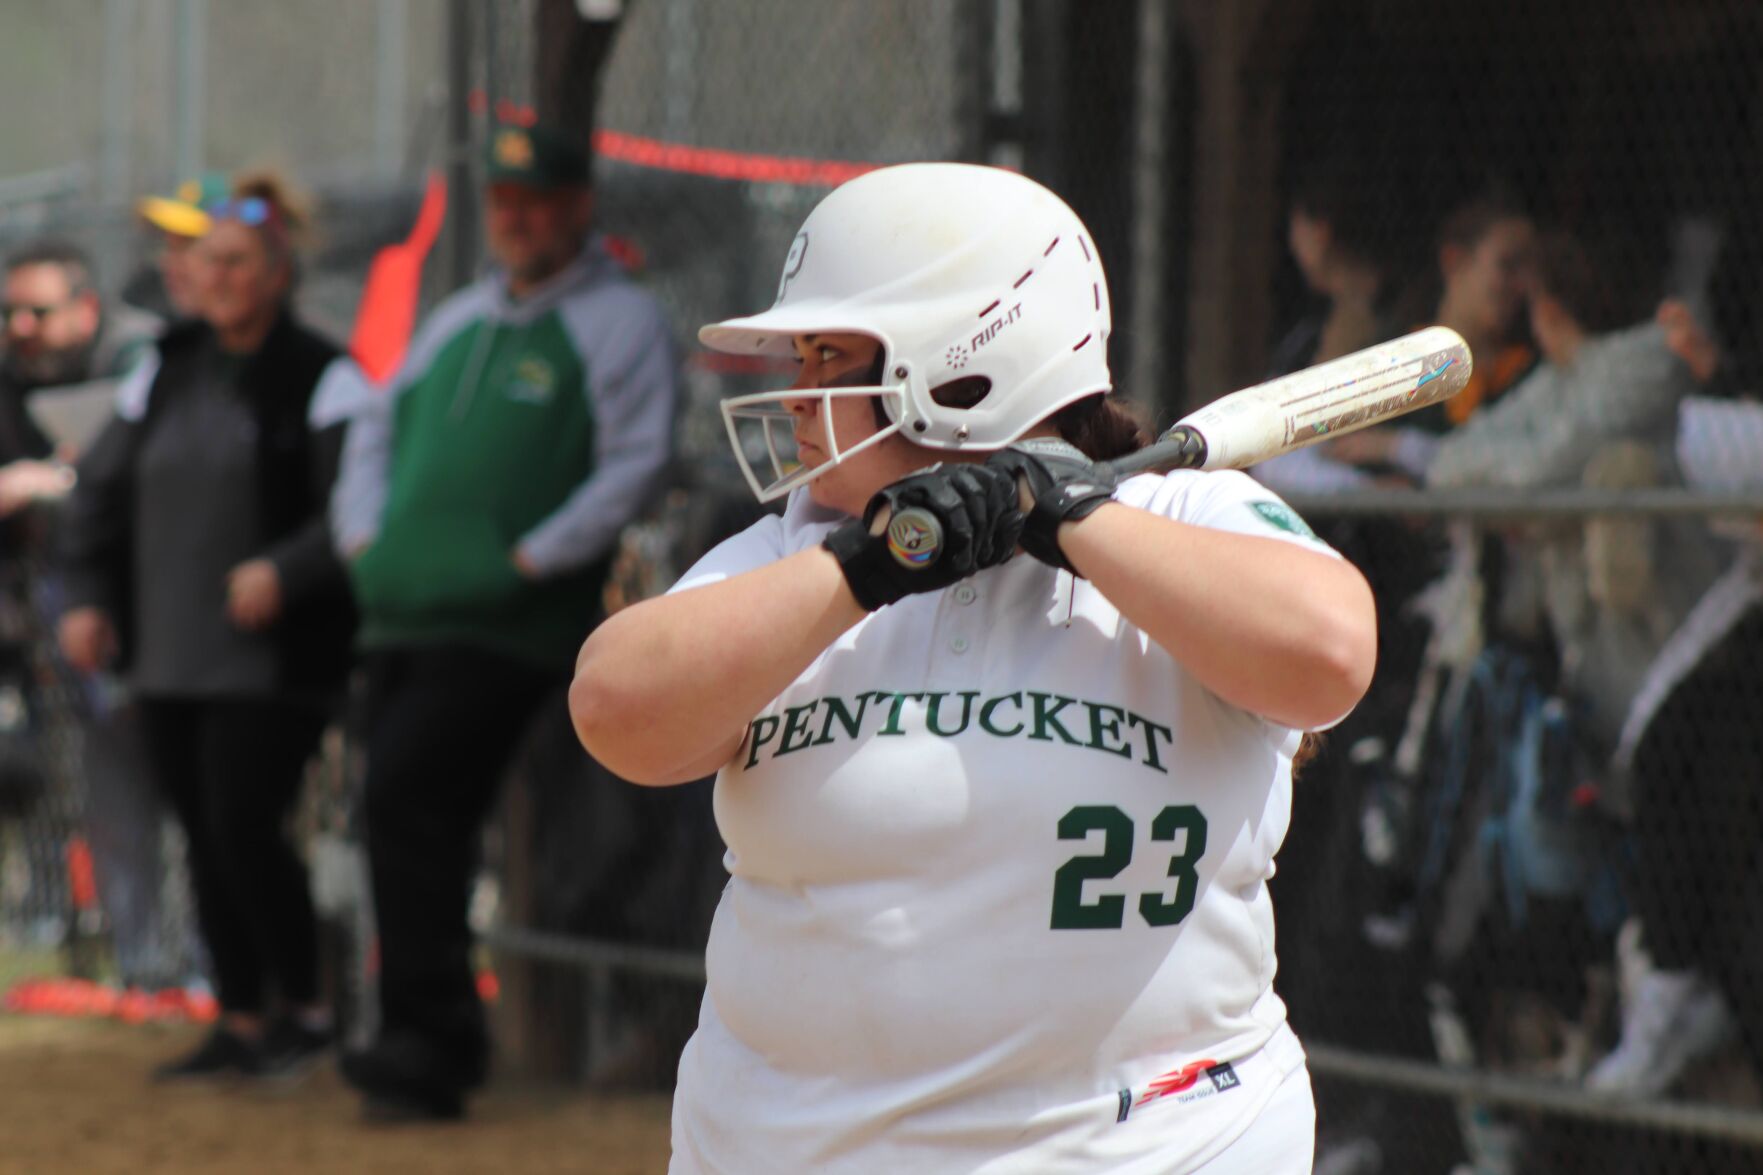 Pentucket Softball Makes History with First Win Over North Reading in 9 Years